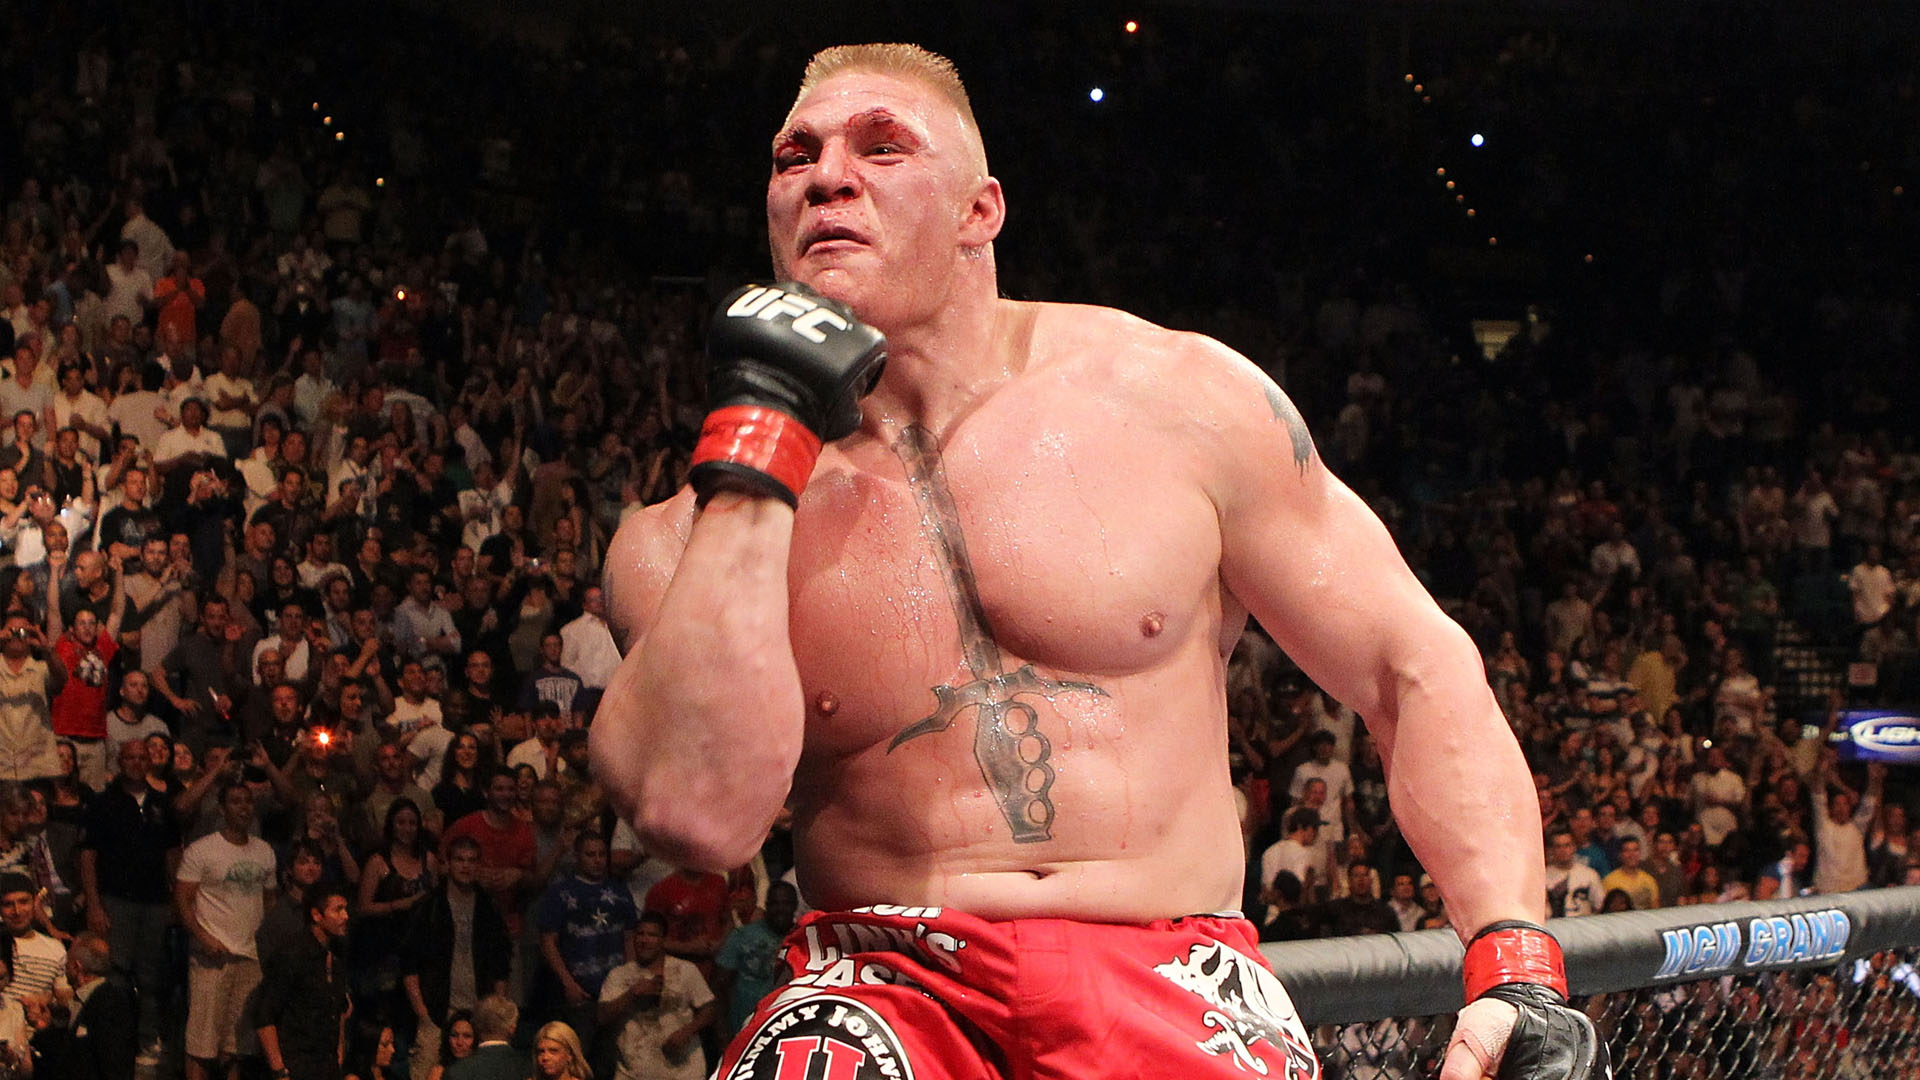 Will we see Brock Lesnar in the UFC again?